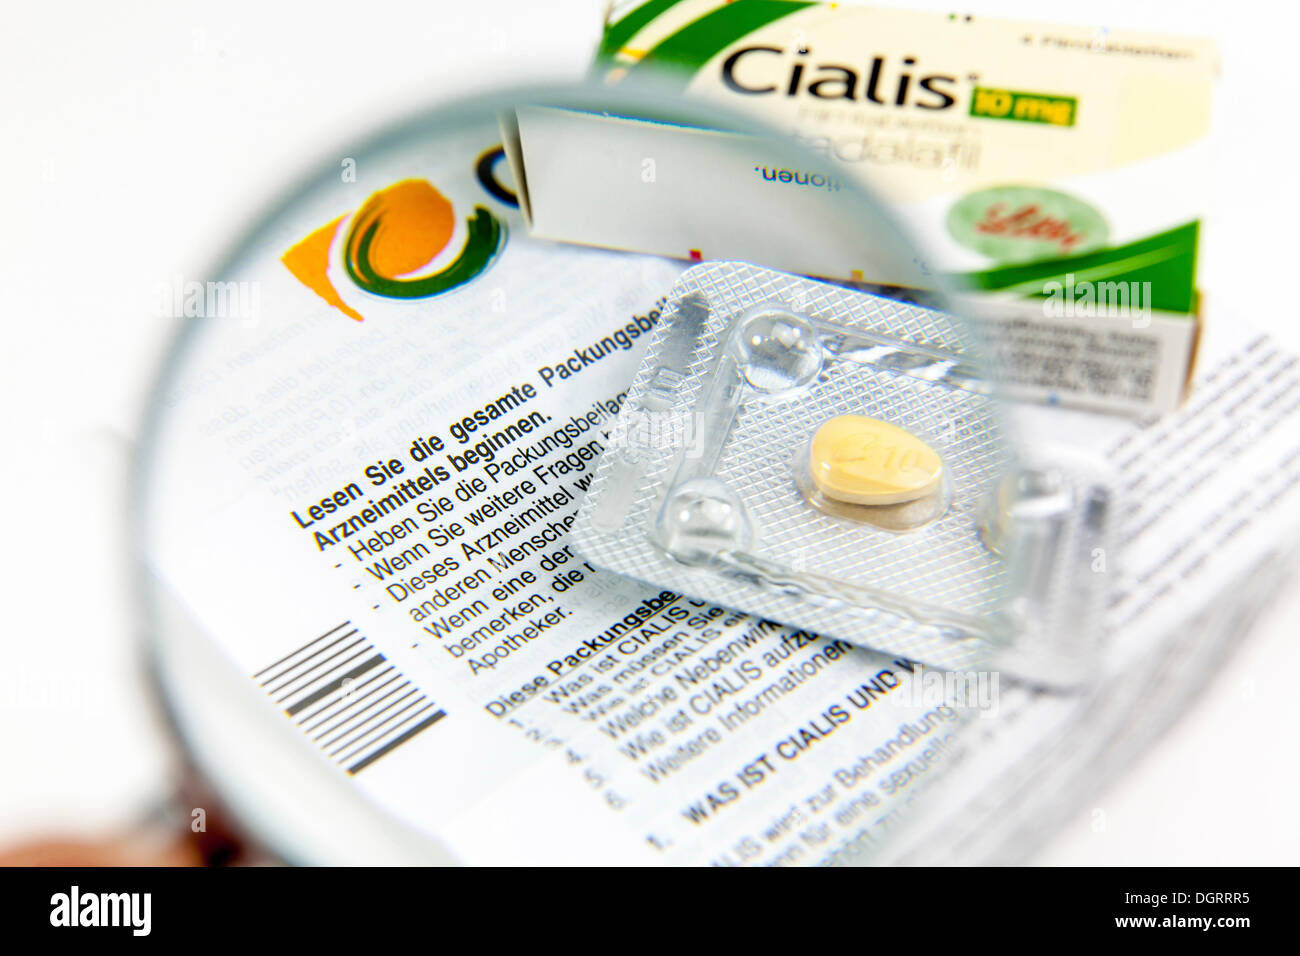 Cialis tablets for increasing virility under a magnifying glass Stock Photo